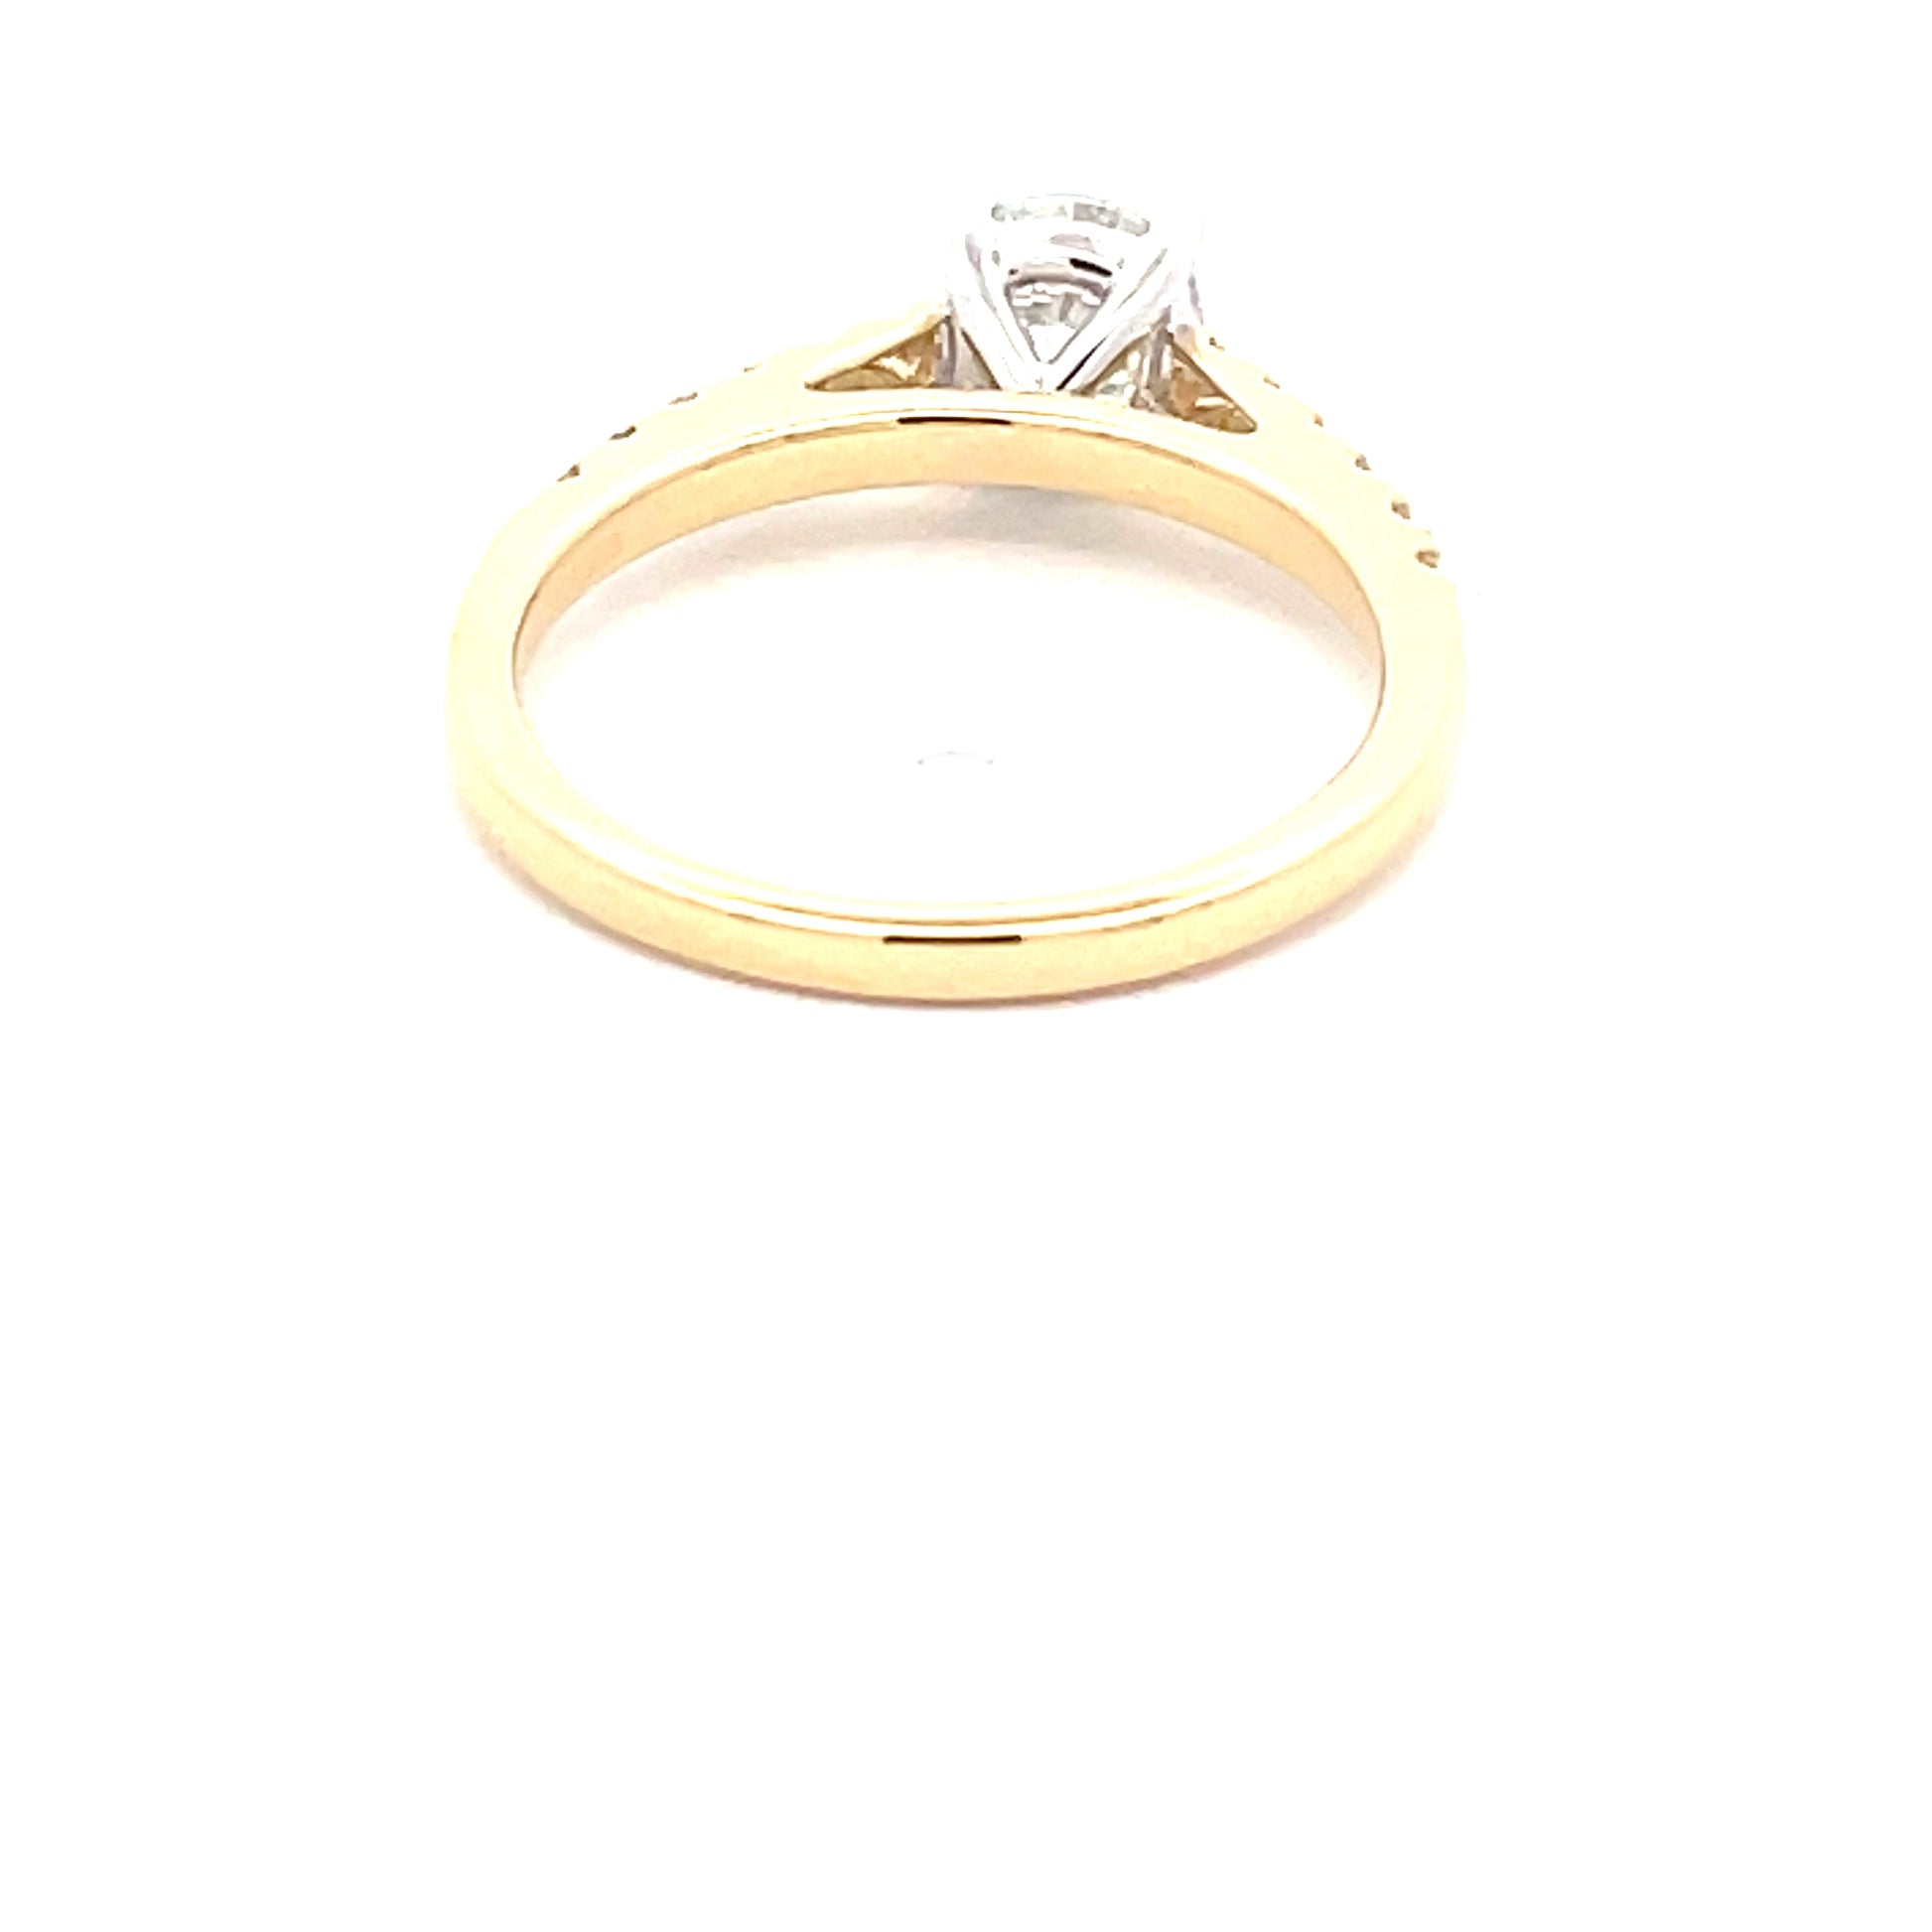 Round Brilliant Cut DIAMOND SOLITAIRE RING WITH DIAMOND SET SHOULDERS - 0.93CTS  Gardiner Brothers   